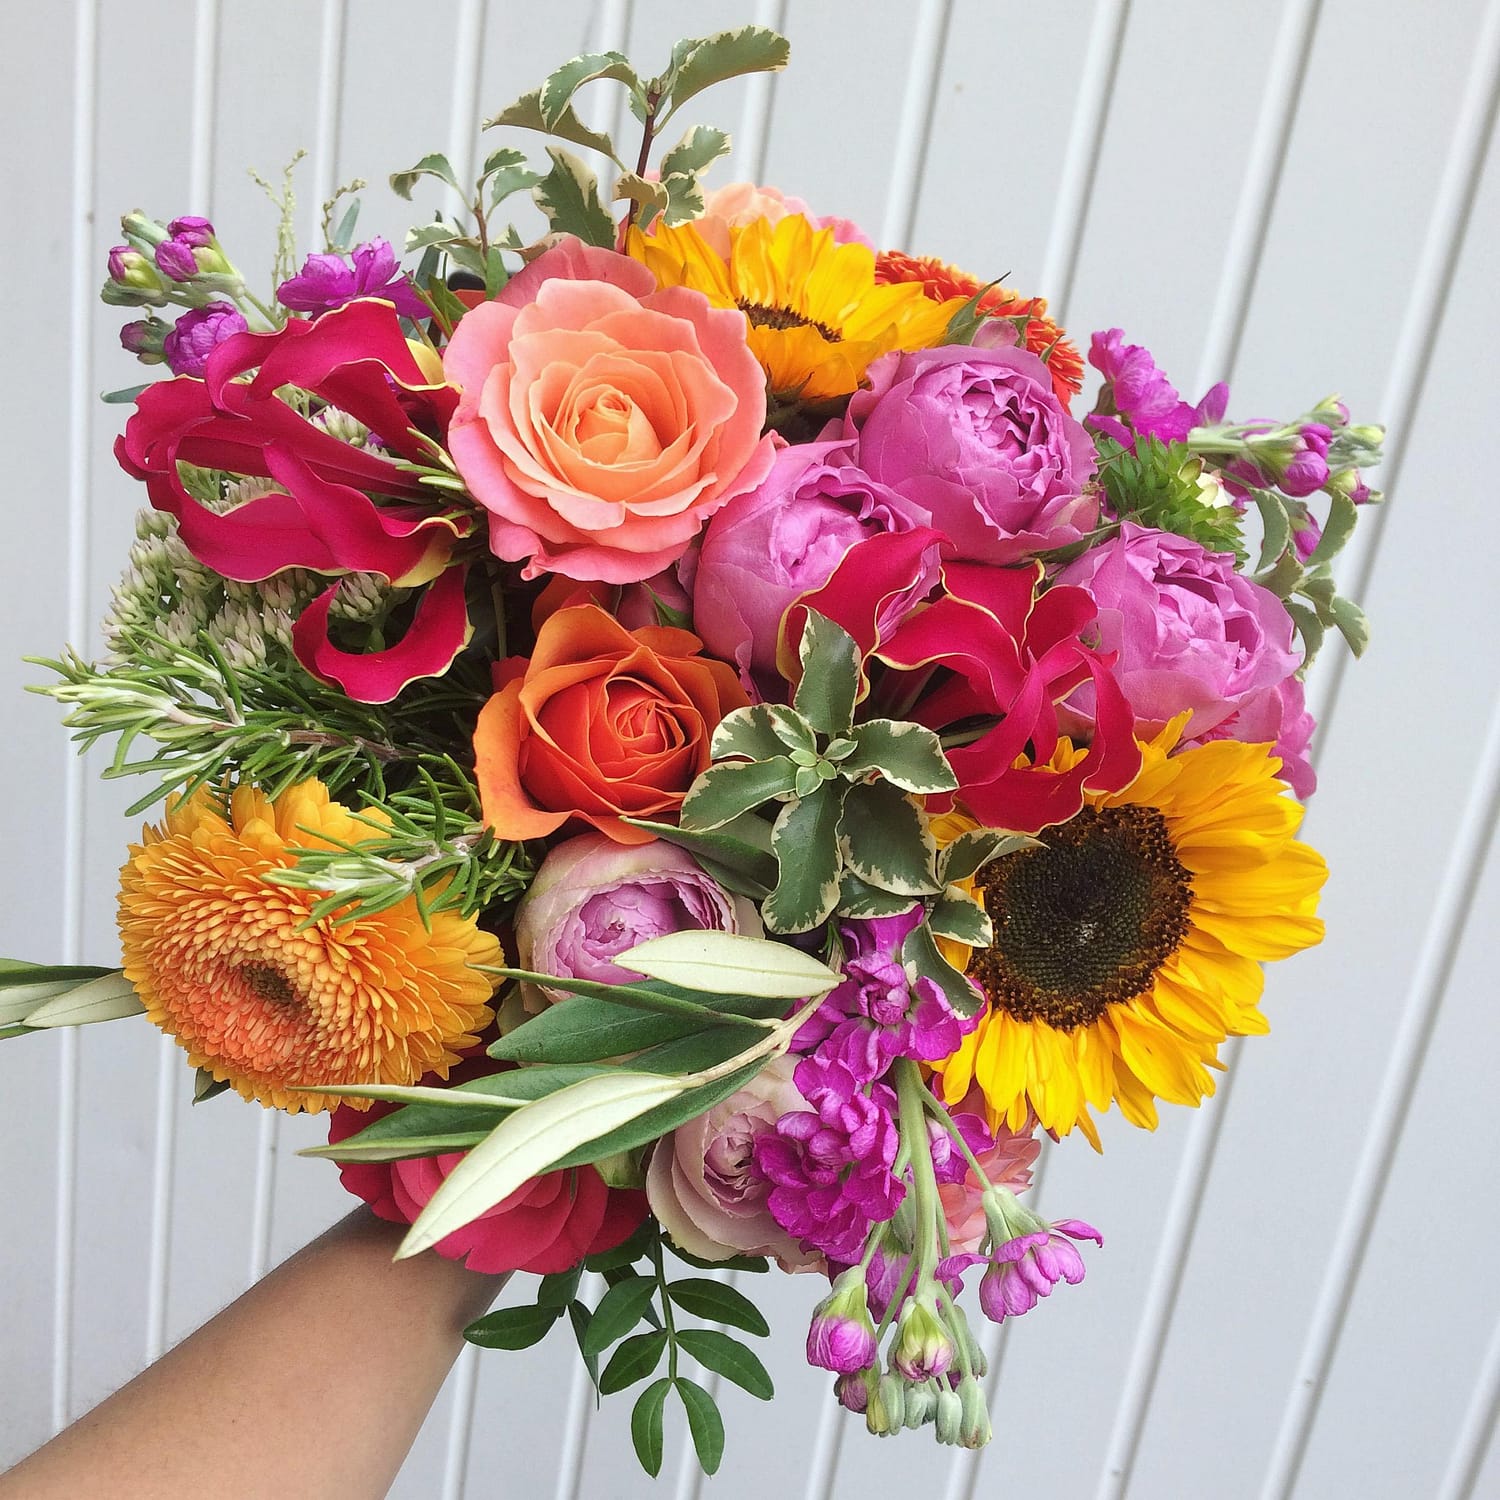 hot cerise pink and yellow bridal bouquet with sunflowers